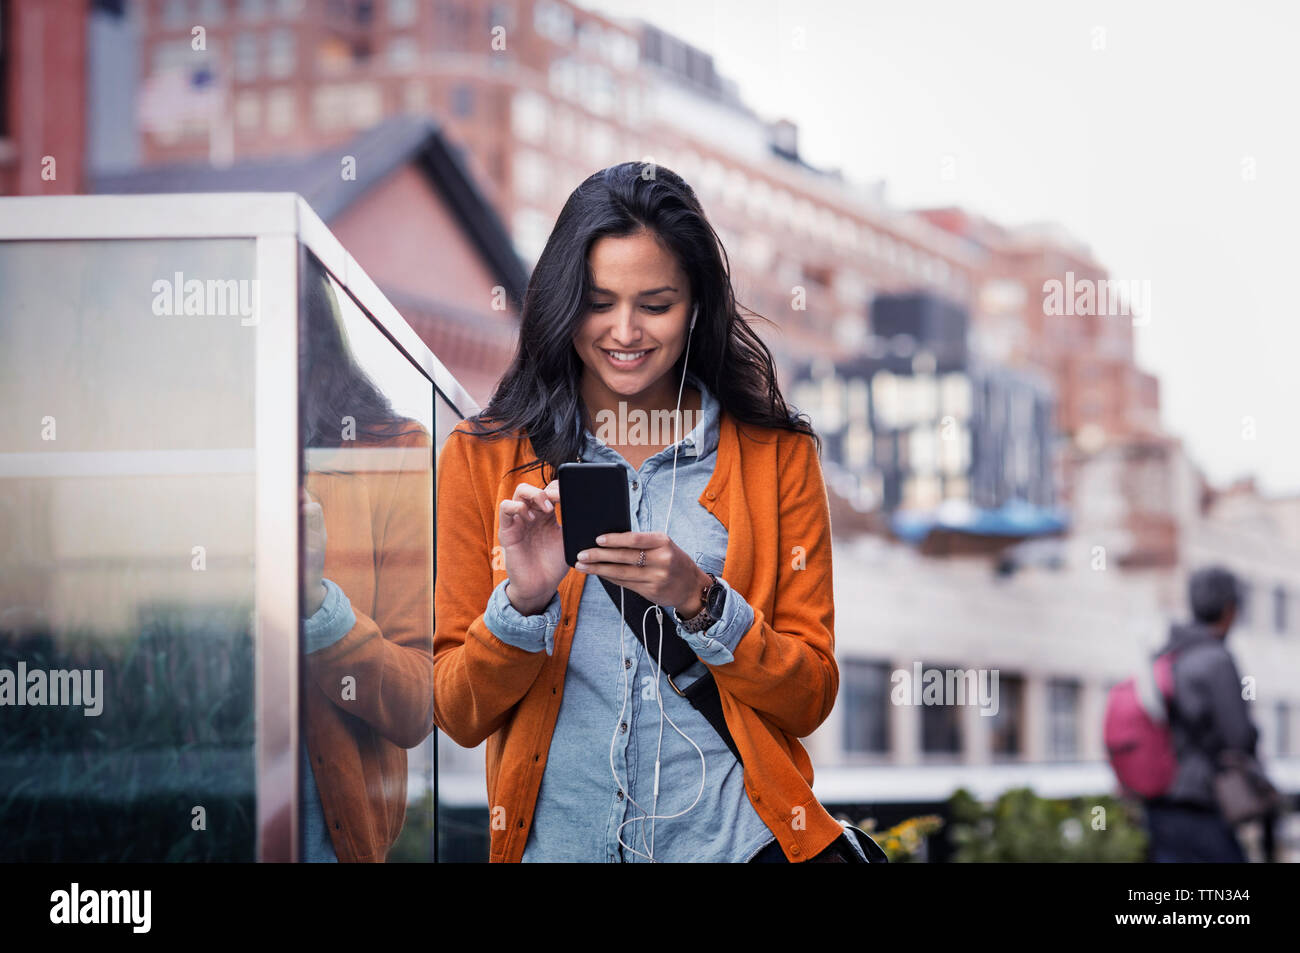 Young woman texting on sidewalk Banque D'Images